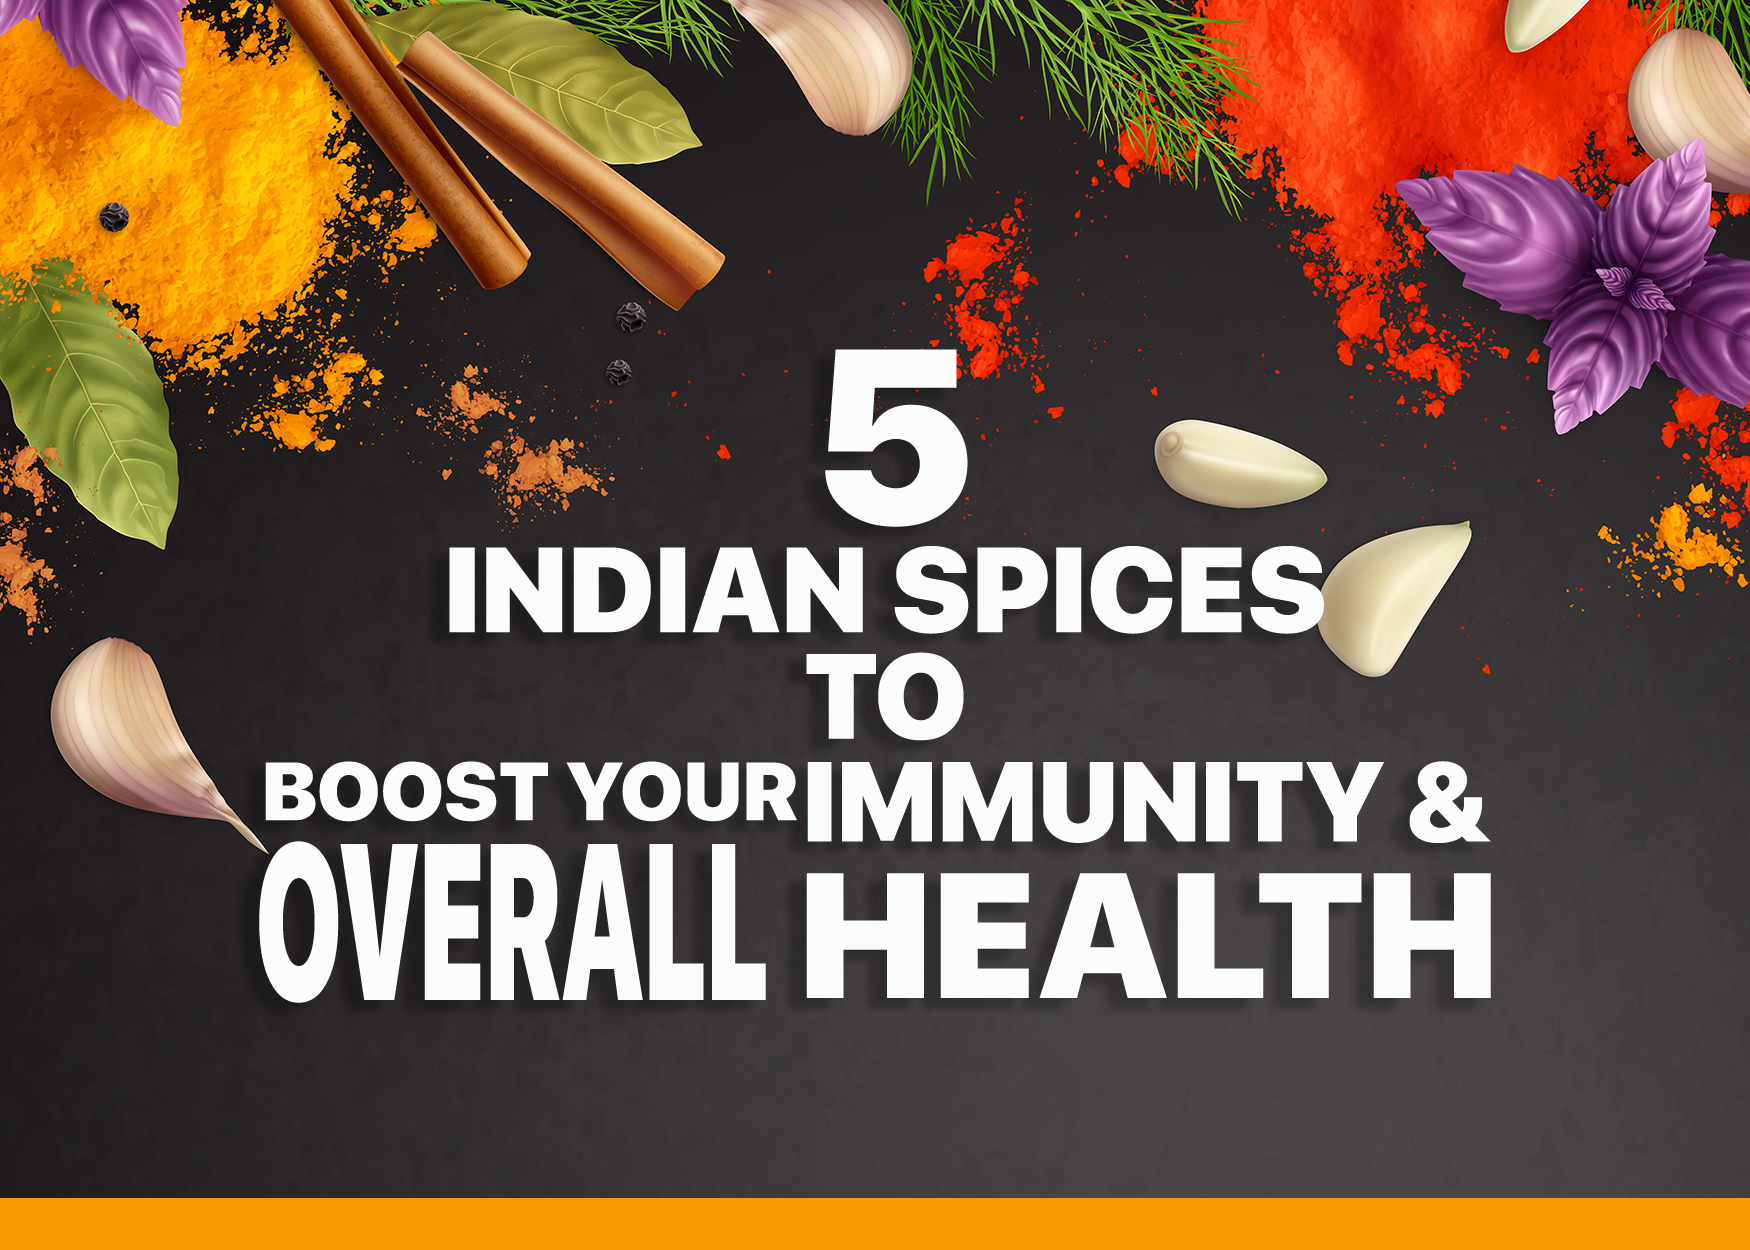 5-indian-spices-to-boost-your-immunity-and-overall-health